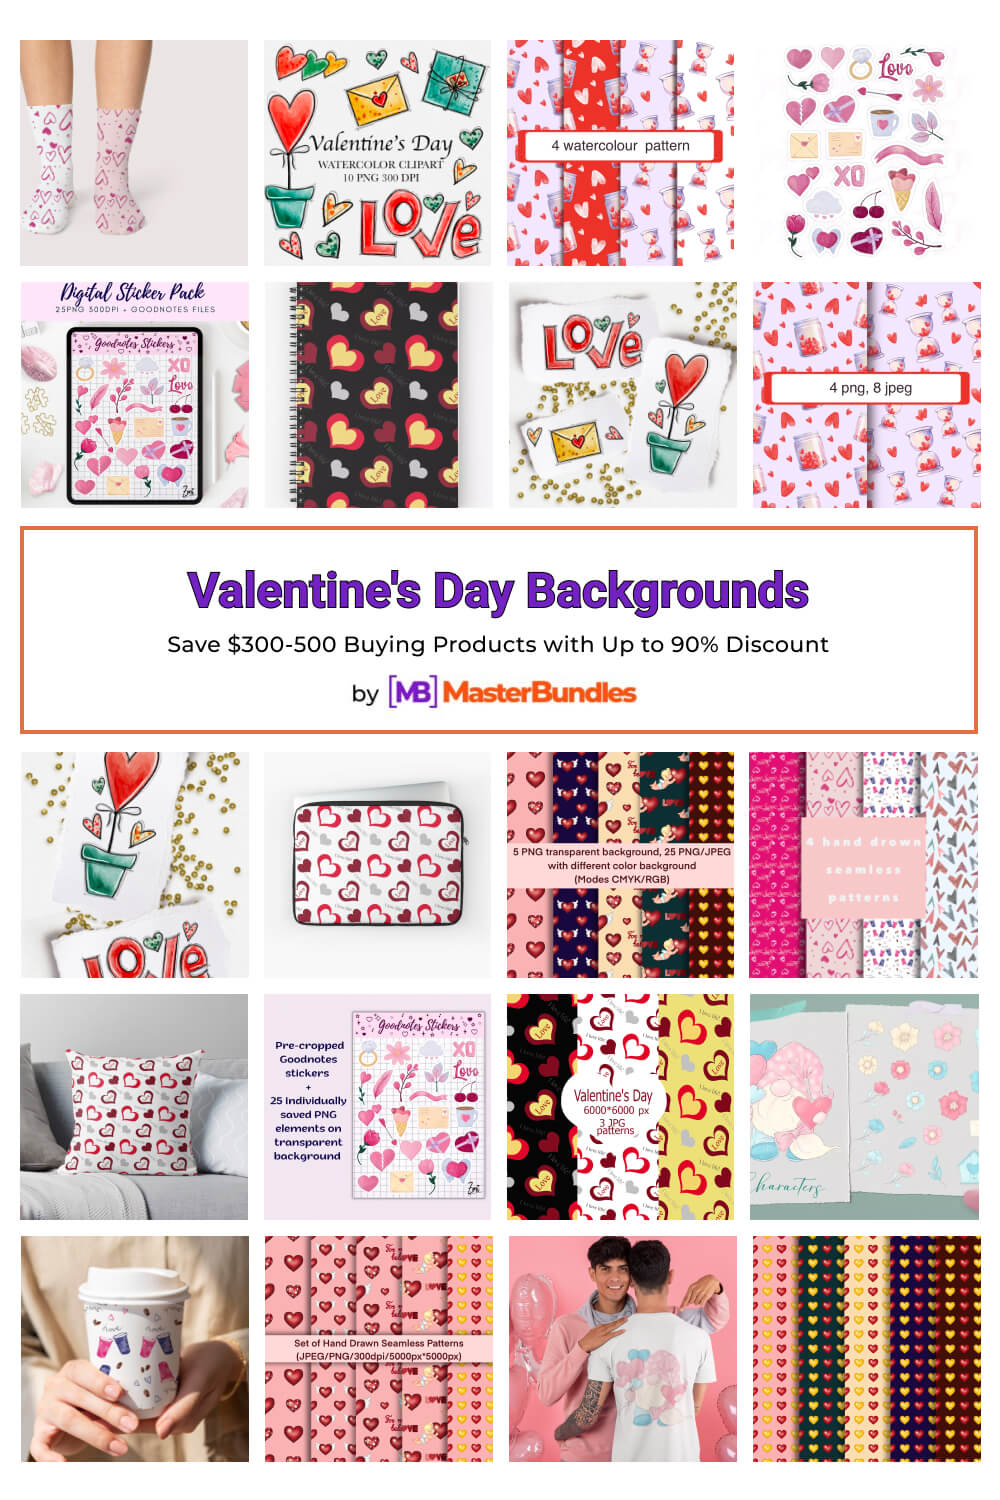 valentines day backgrounds pinterest image.